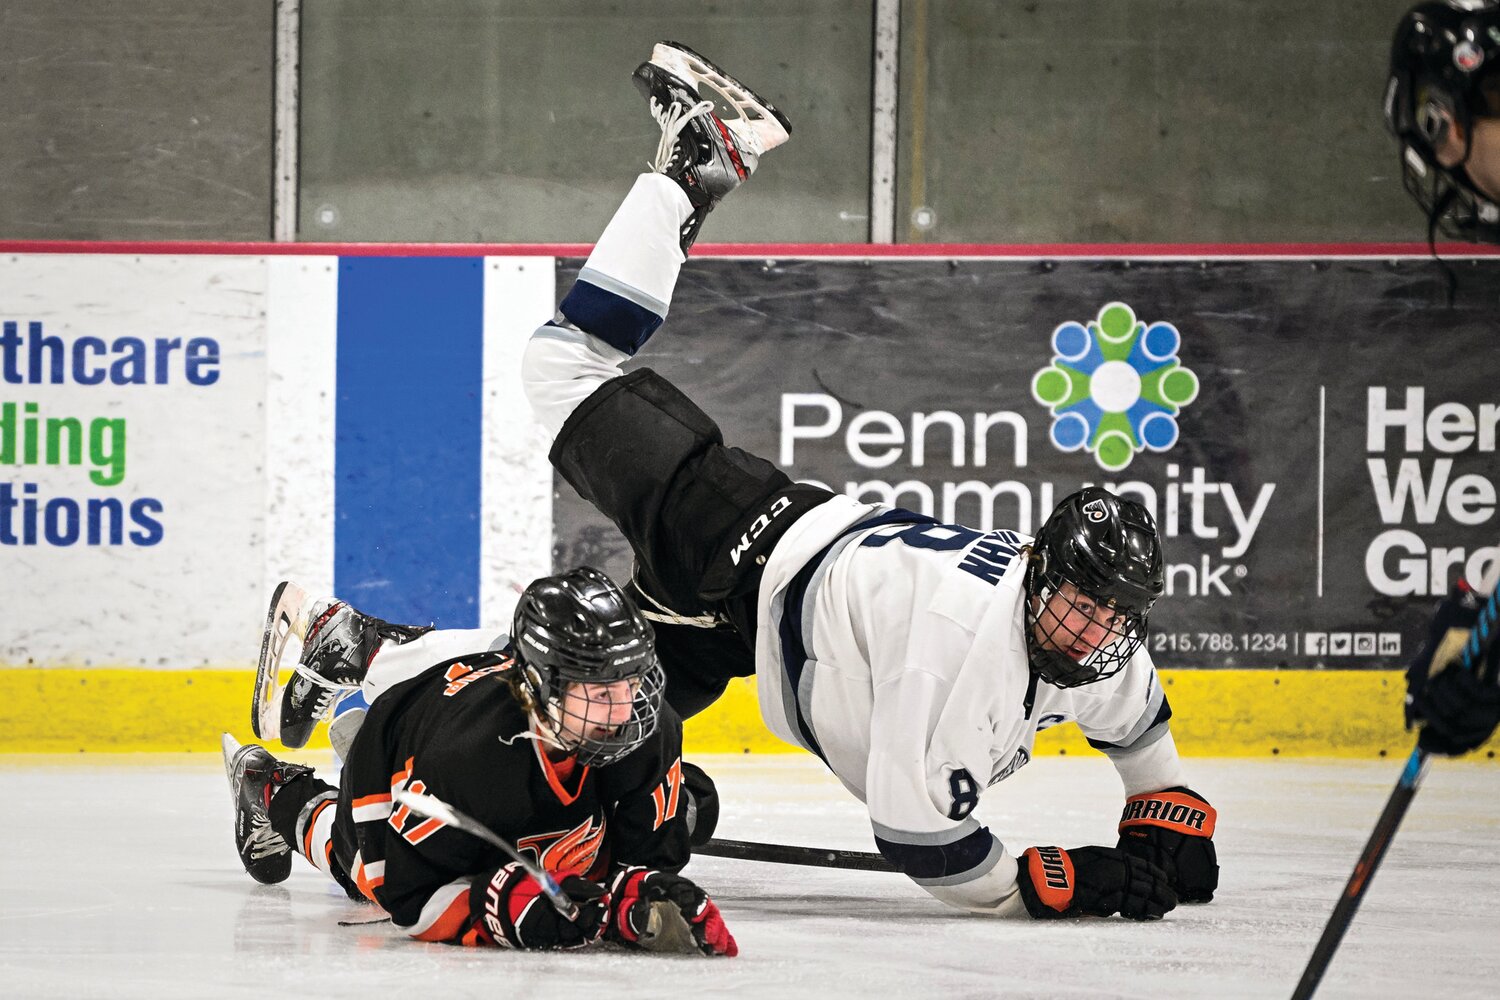 Council Rock North’s Nicholas Hahn gets upended from a check by Pennsbury’s Stevie Grosscup while going after a loose puck.